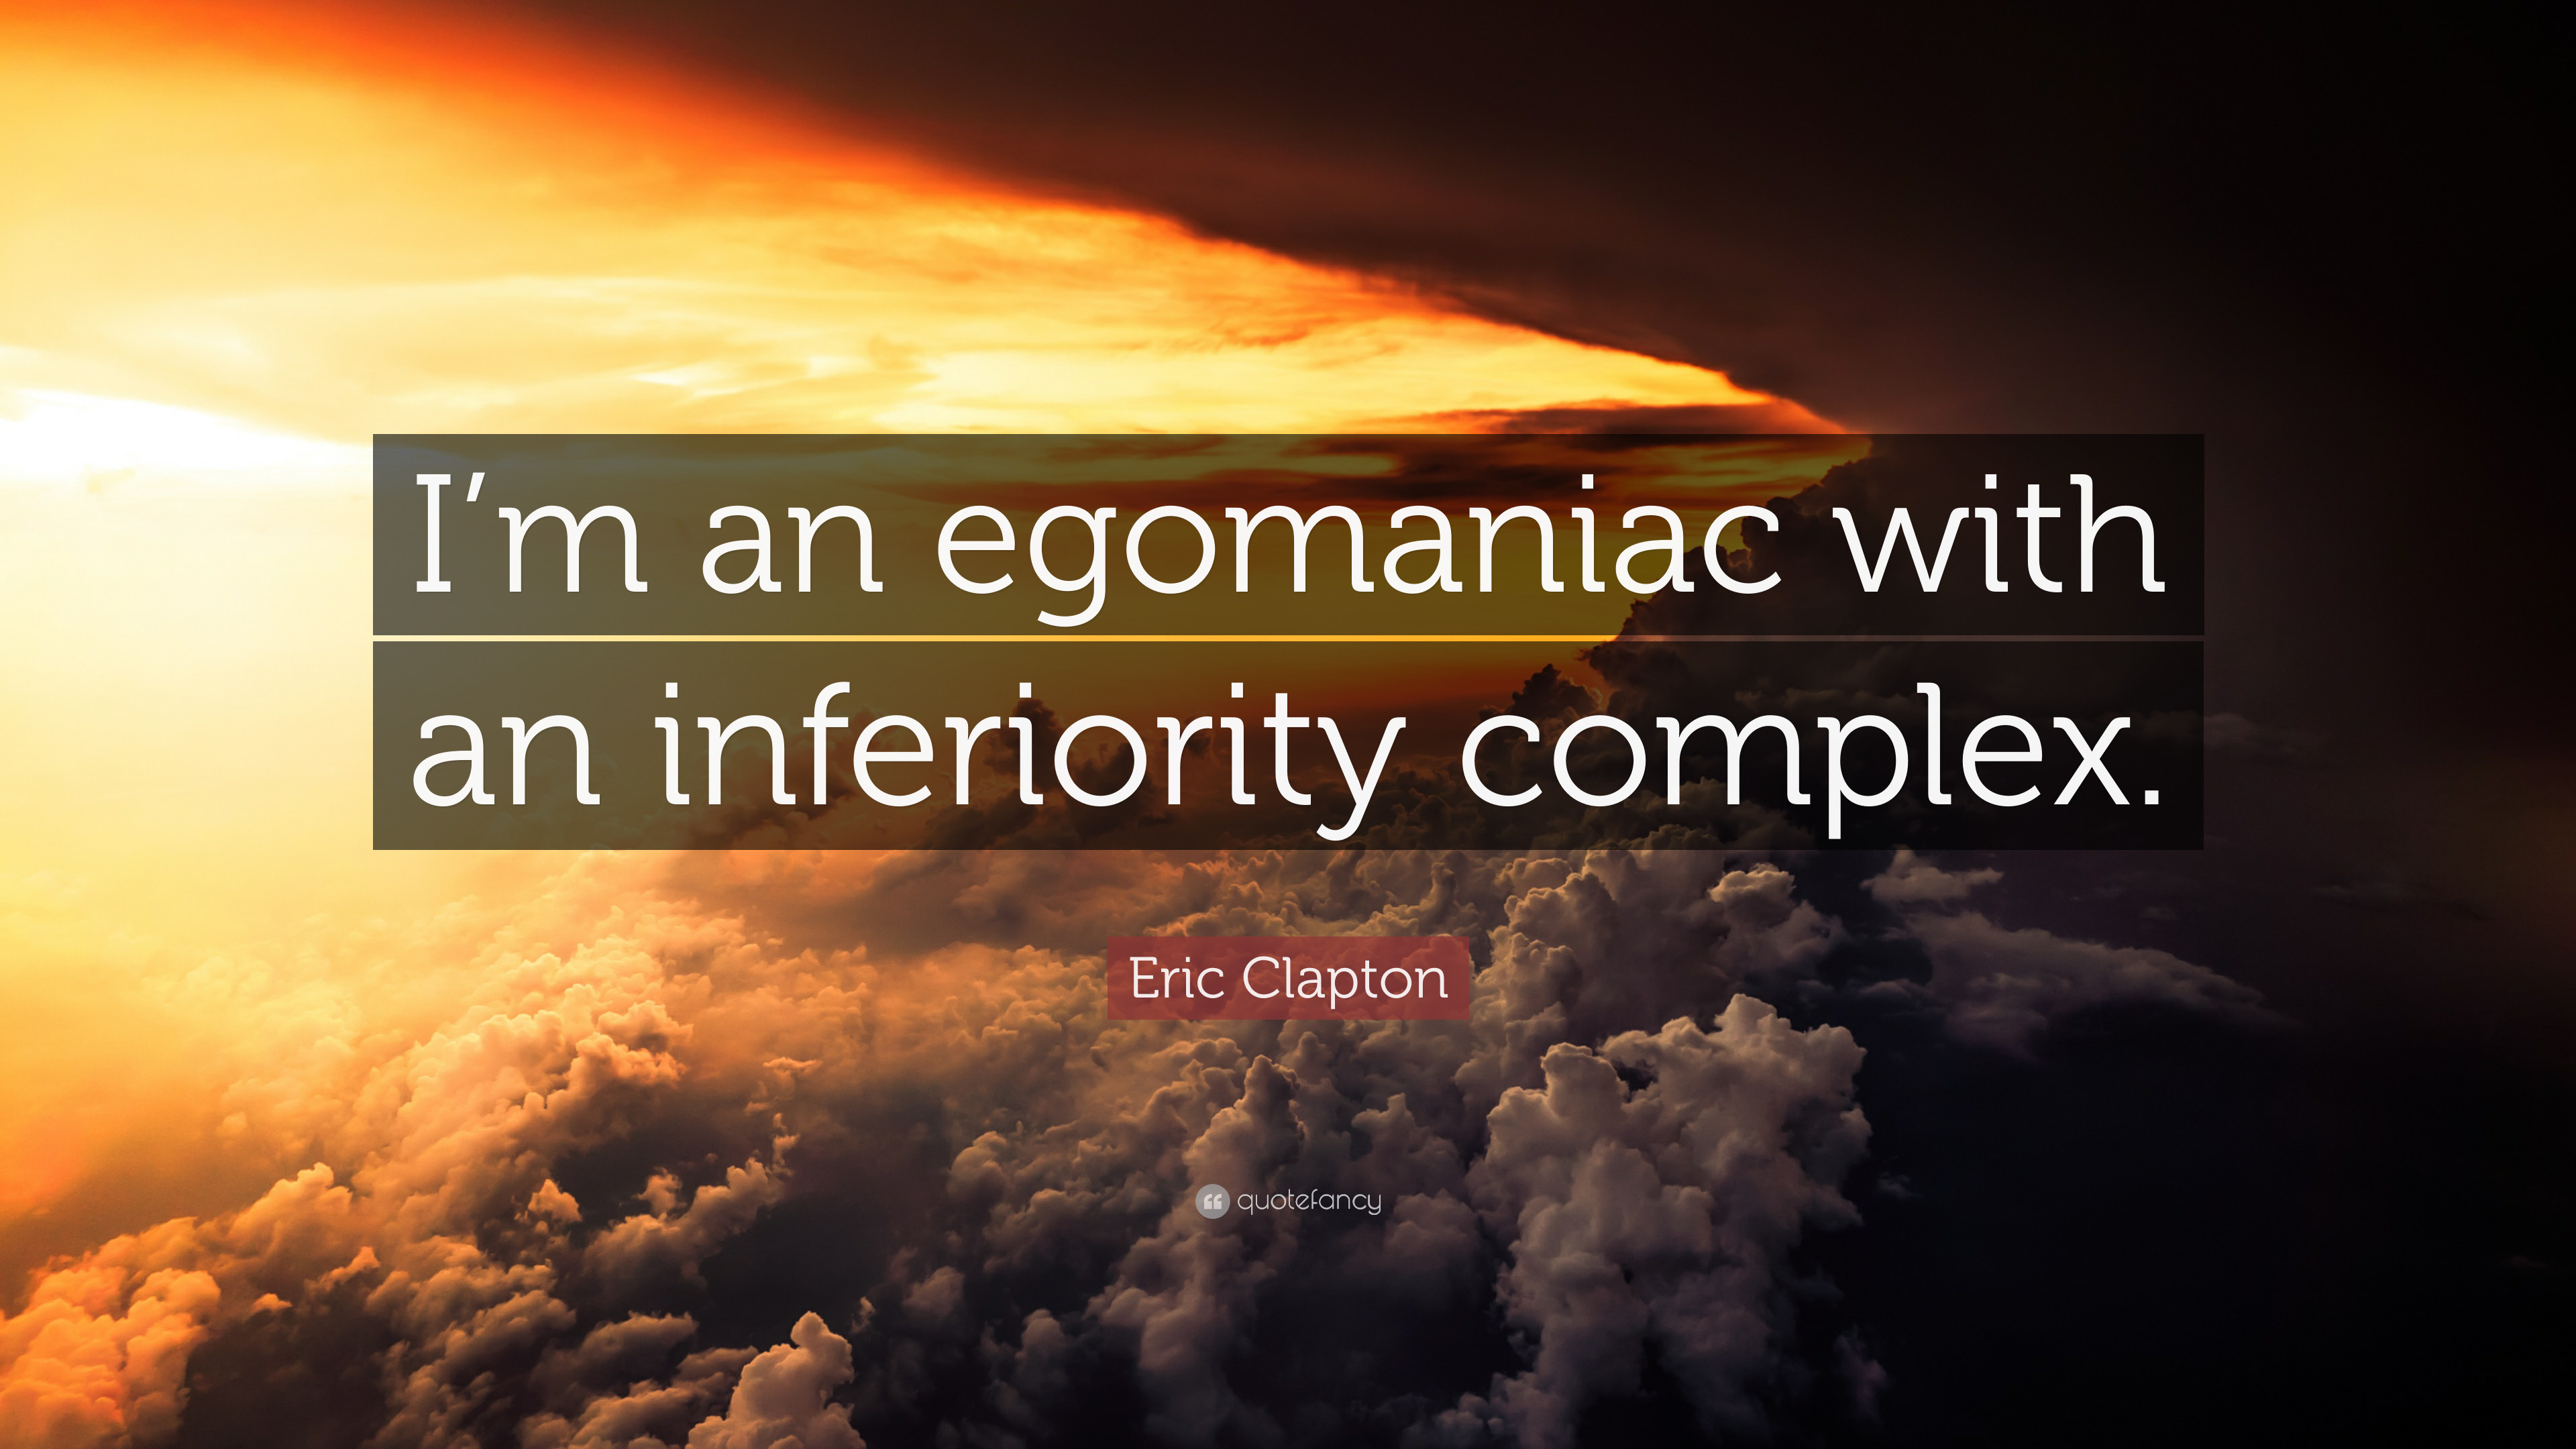 3840x2160 Eric Clapton Quote: “I'm an egomaniac with an inferiority complex.”